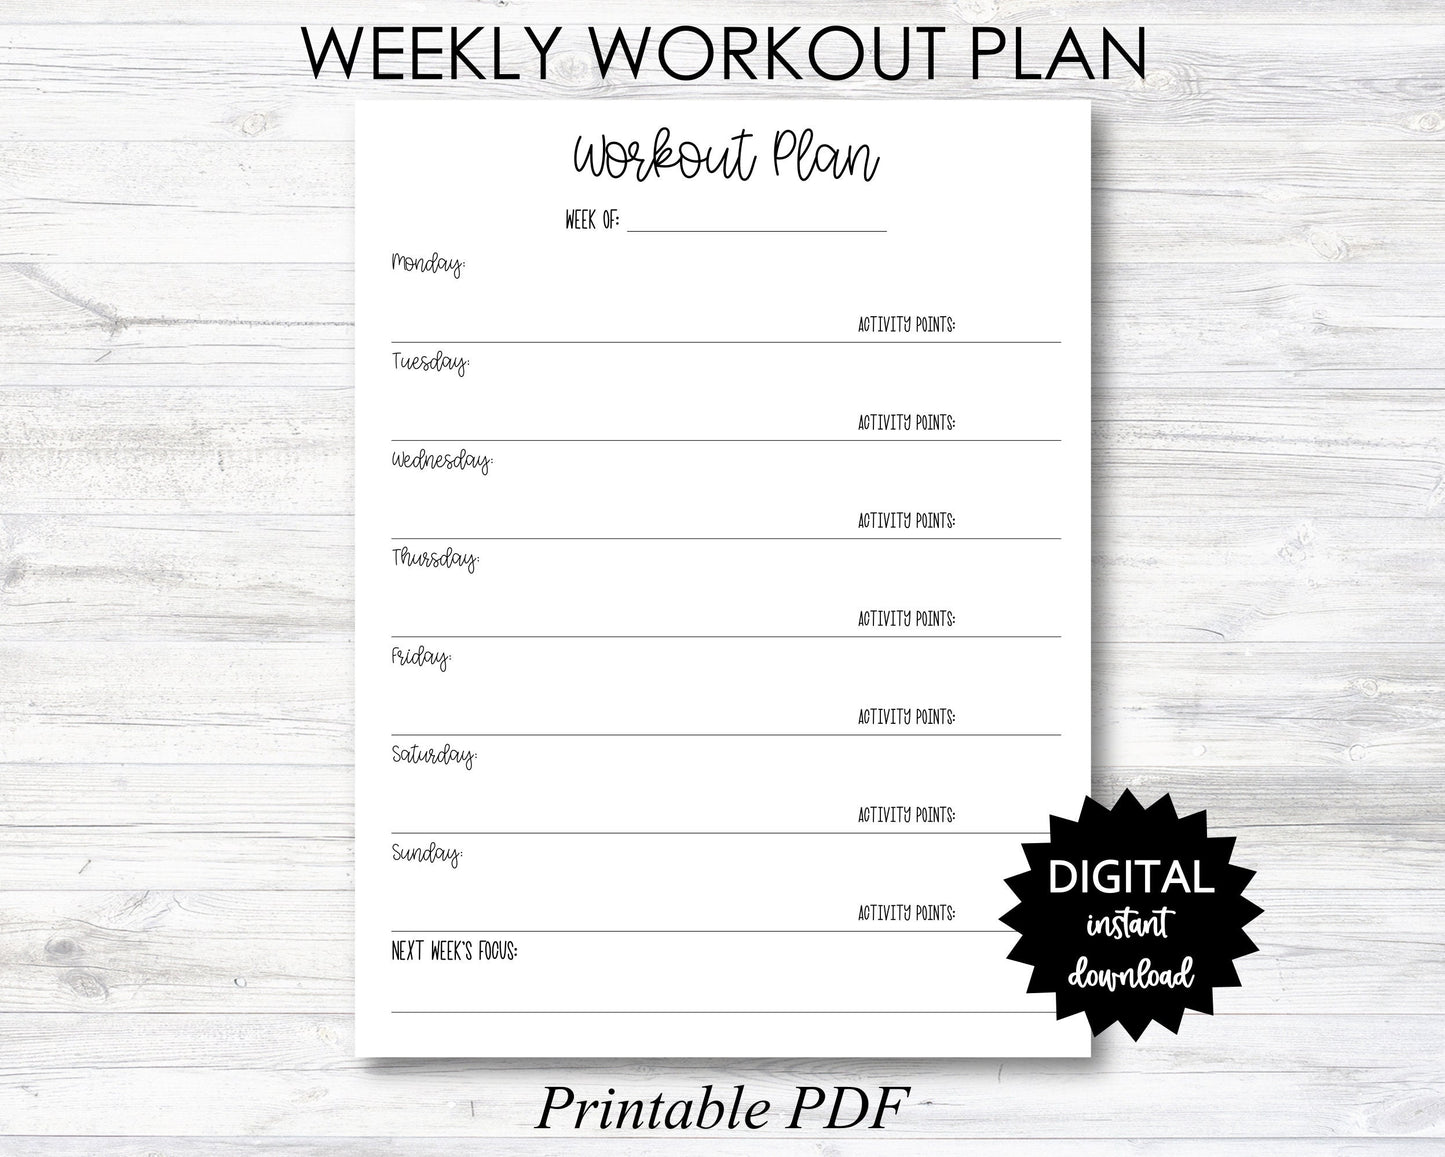 Weekly Workout Plan Printable, Weekly Workout Plan Planner Page - With Activity Points - PRINTABLE (N054)